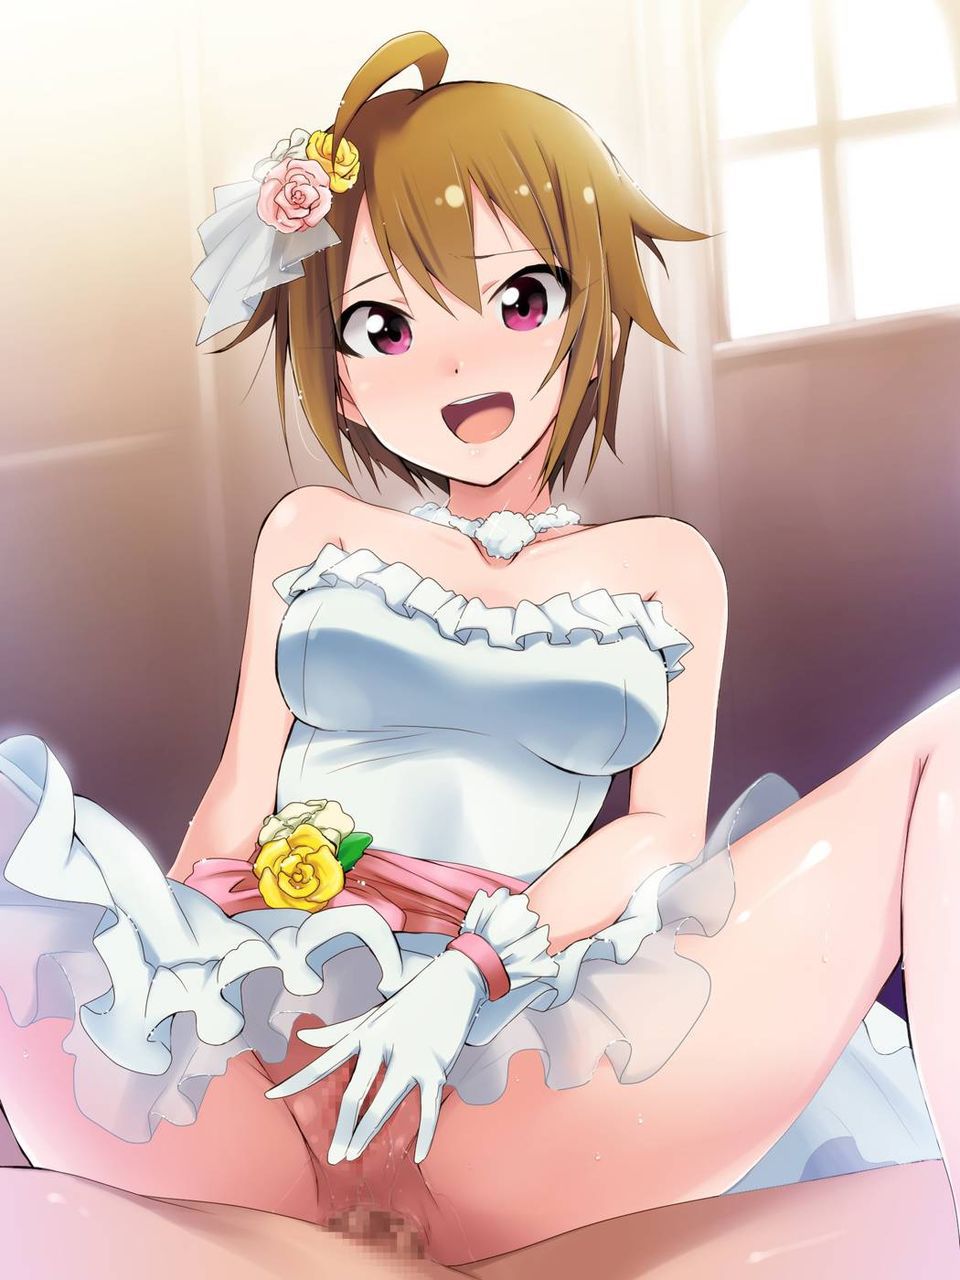 To release the idolmaster erotic images folder 3